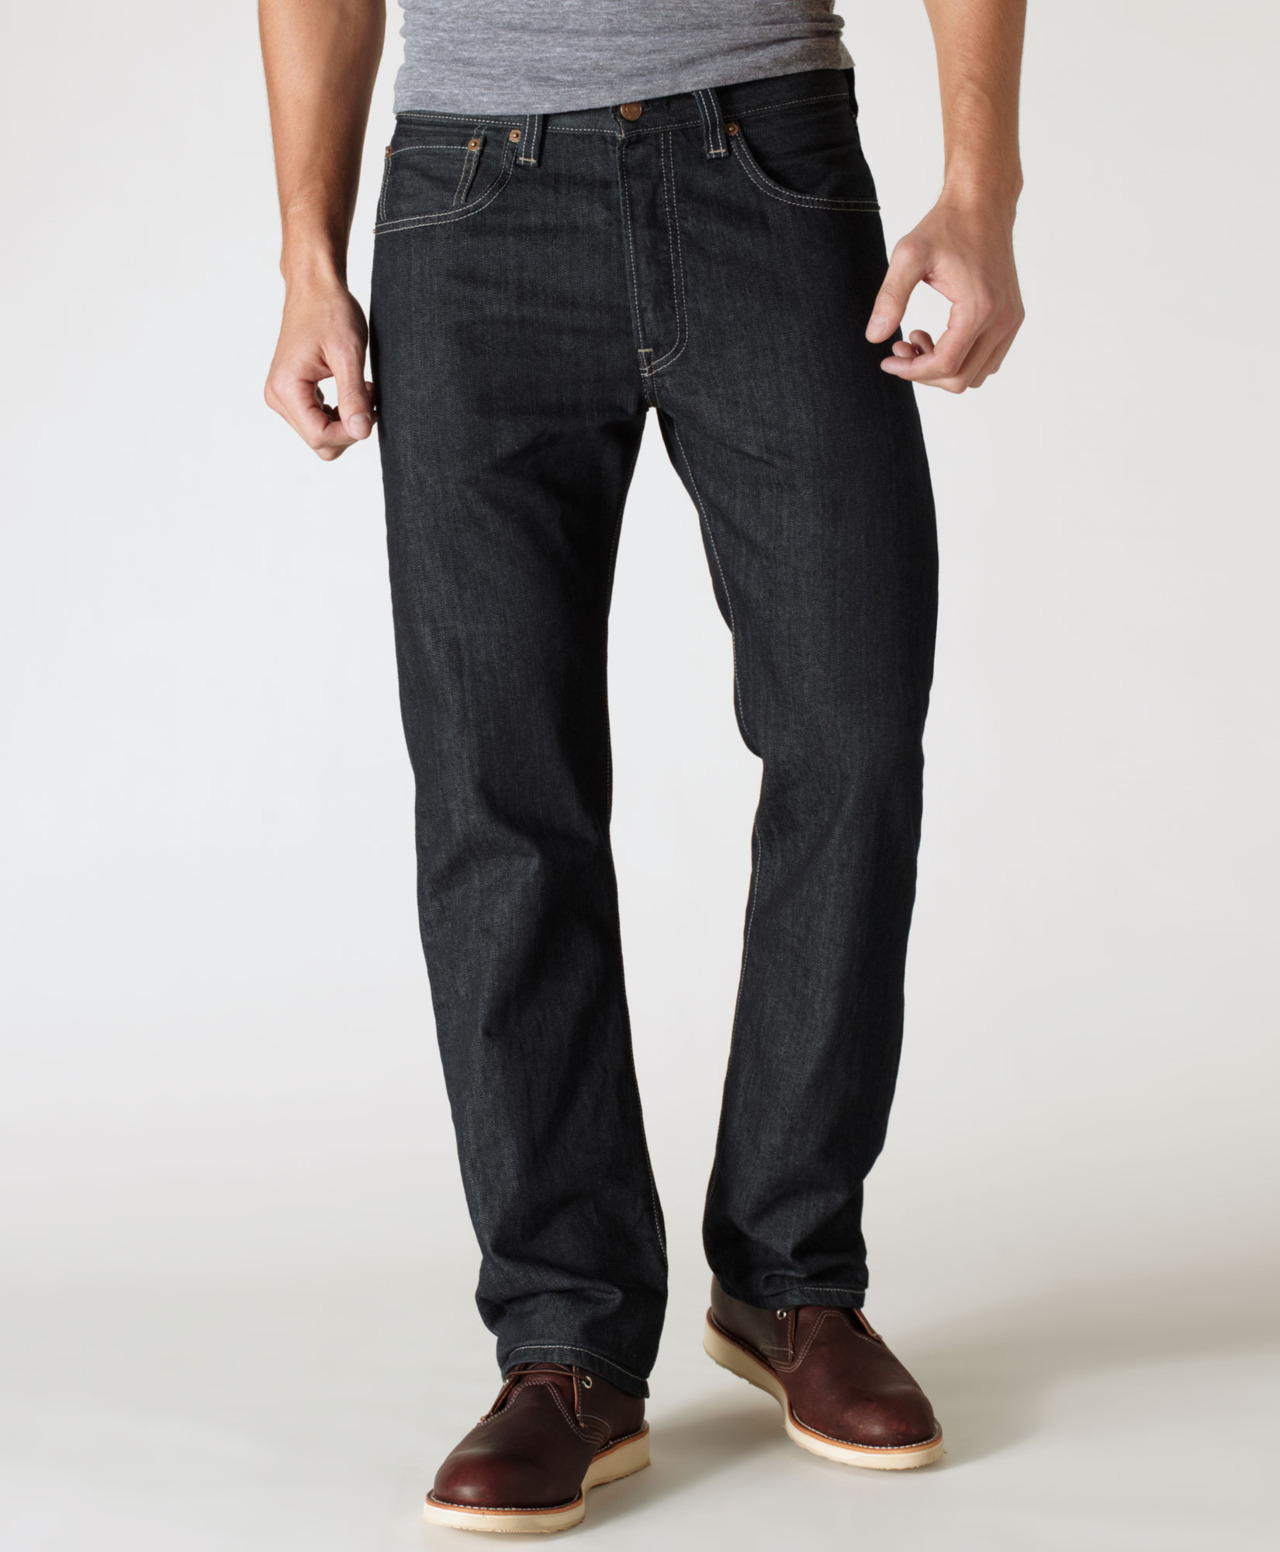 It’s On Sale: Levi’s Jeans – Put This On